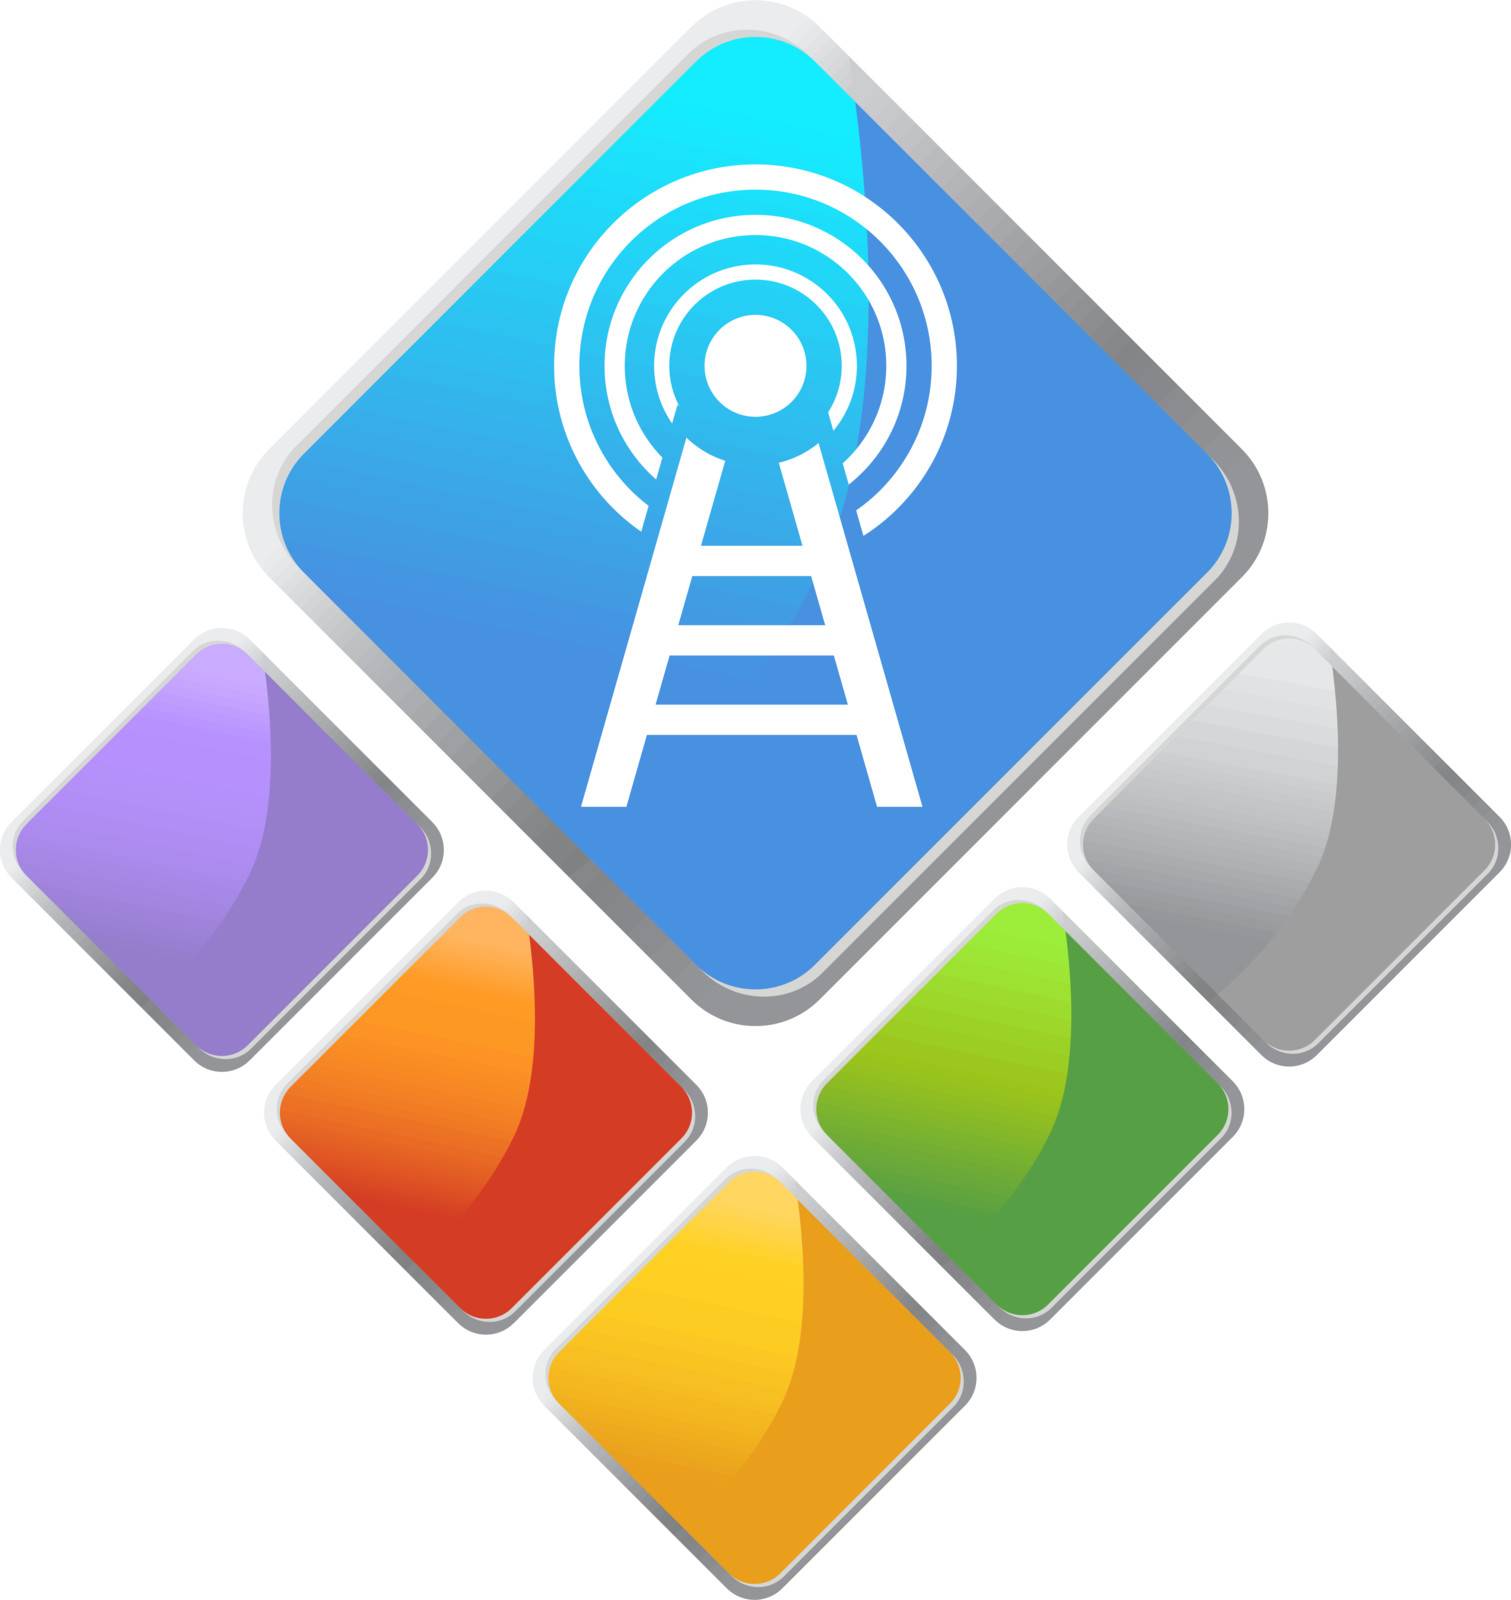 Tower Square icon in multiple colors.